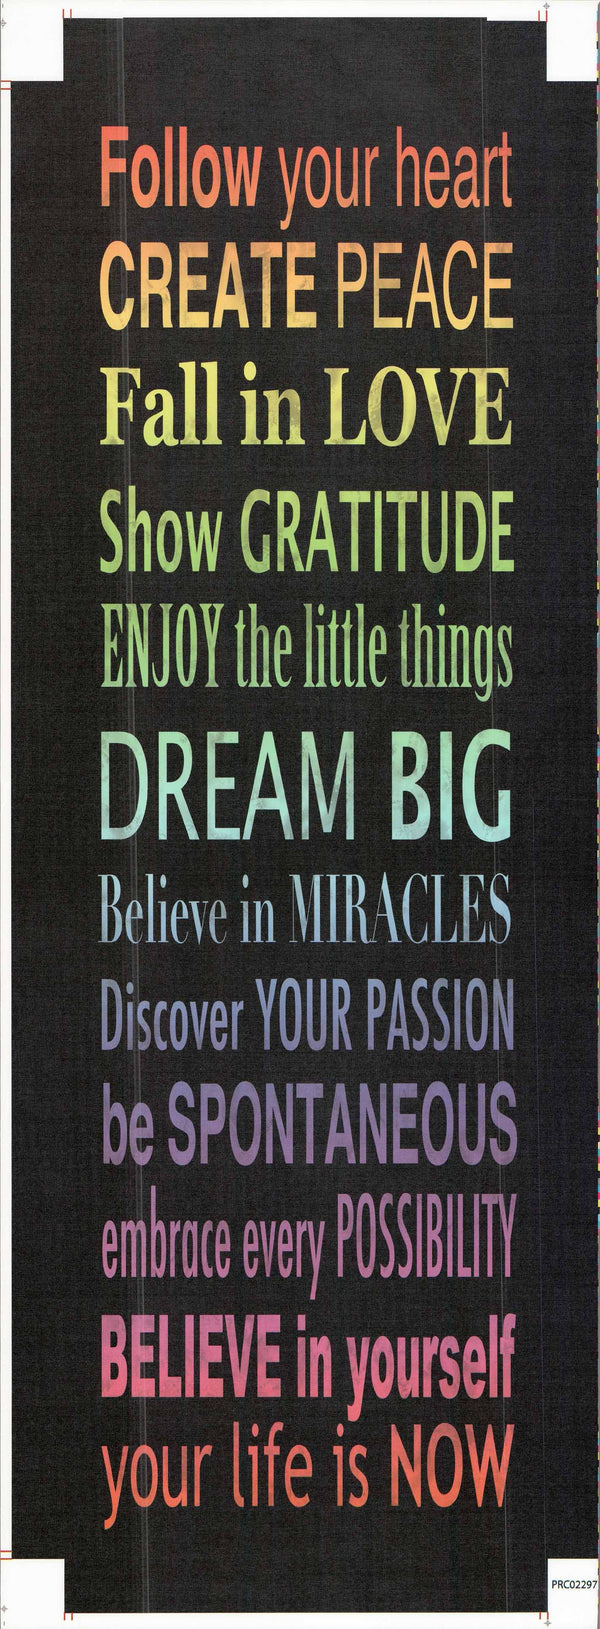 Dream Big - 16 X 48 Inches (Canvas Roll or Stretched ready to hang)